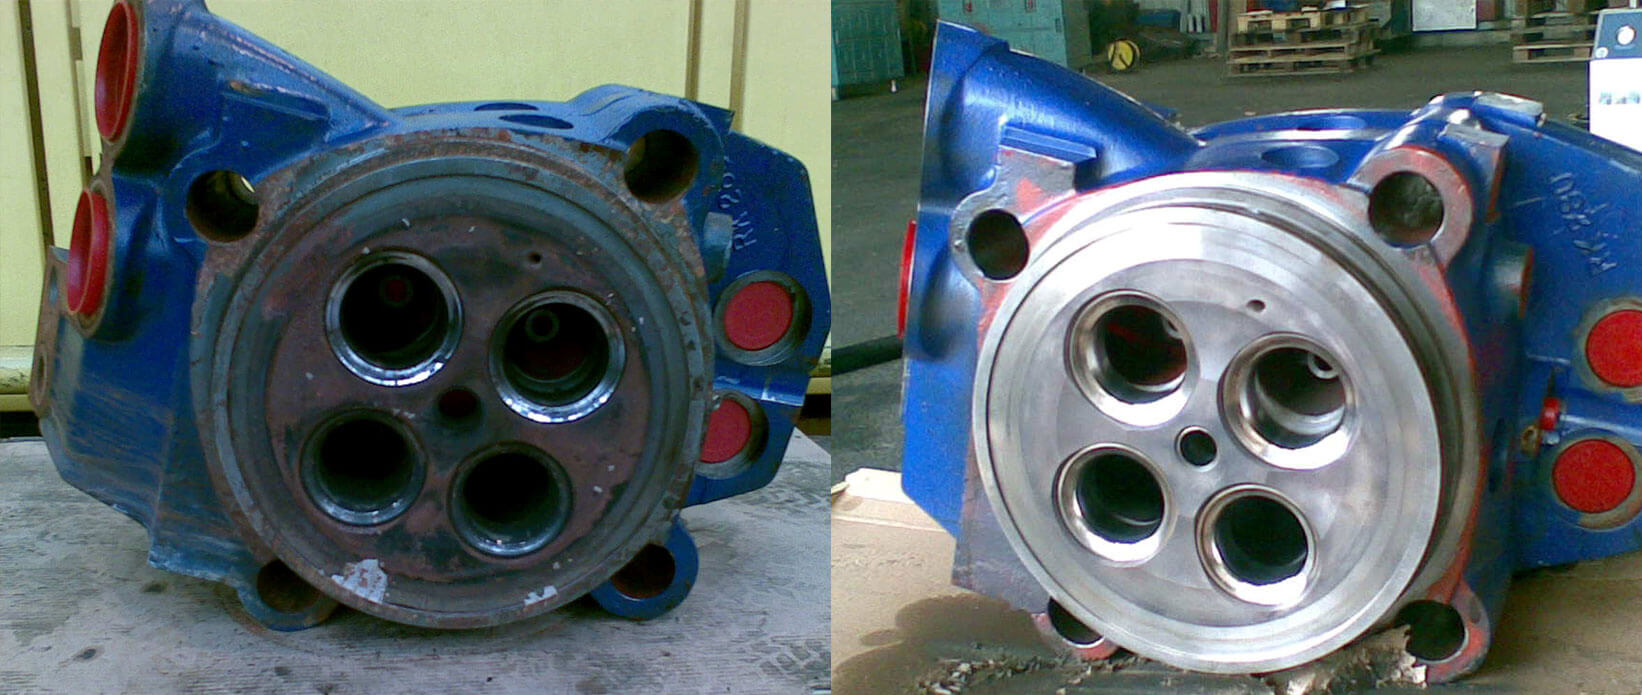 Engine Cylinder Head (Before & After)